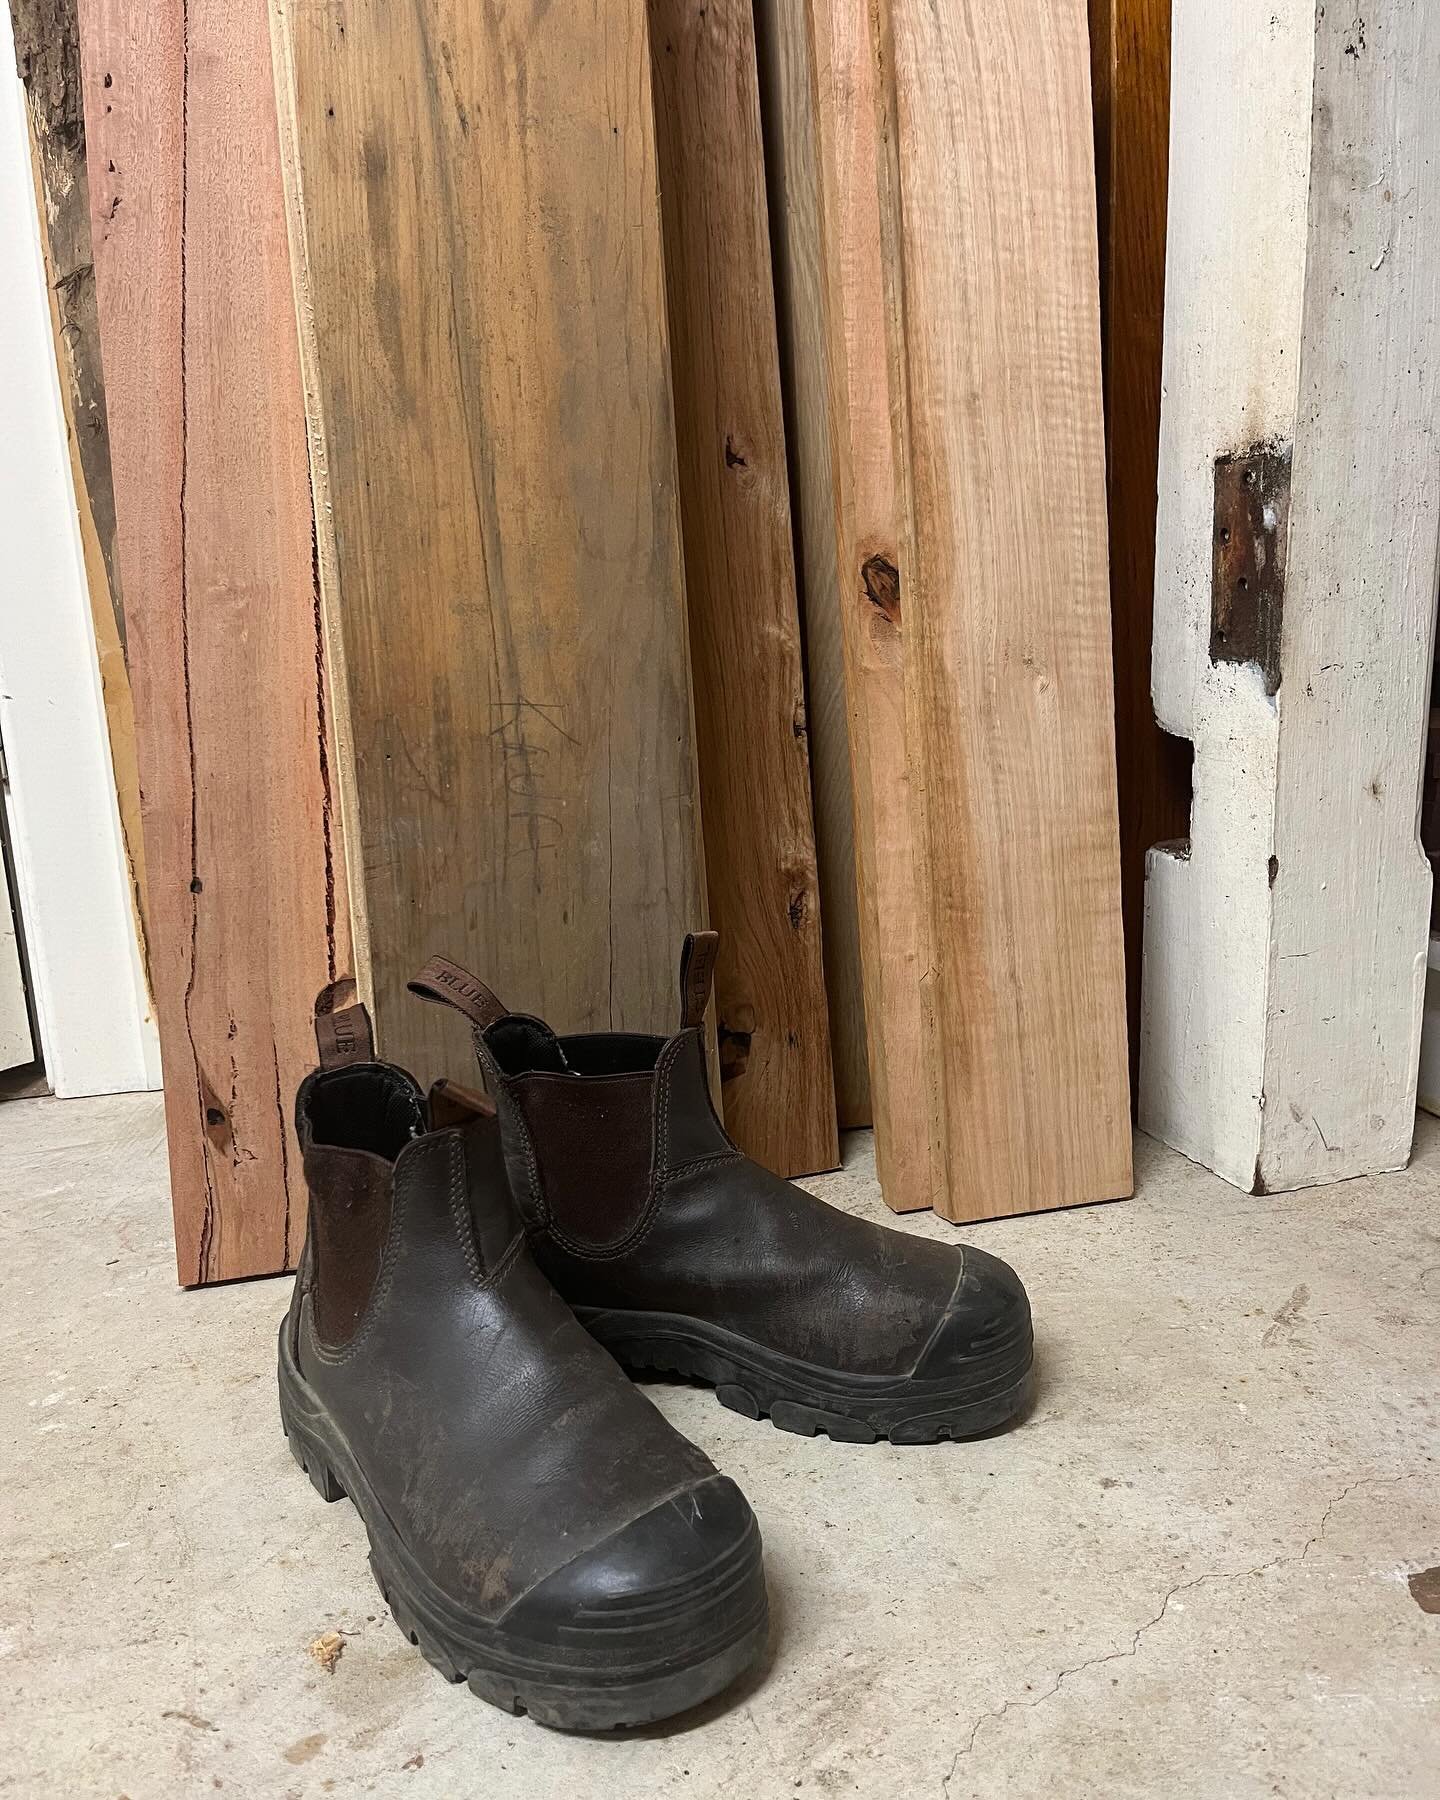 Boots are made for walking and work Boots are made for working in our woodworking Workshop!

In case you weren&rsquo;t aware, everything is included in our woodworking Workshop experience, except the Boots!
Sorry that&rsquo;s one I can&rsquo;t help y